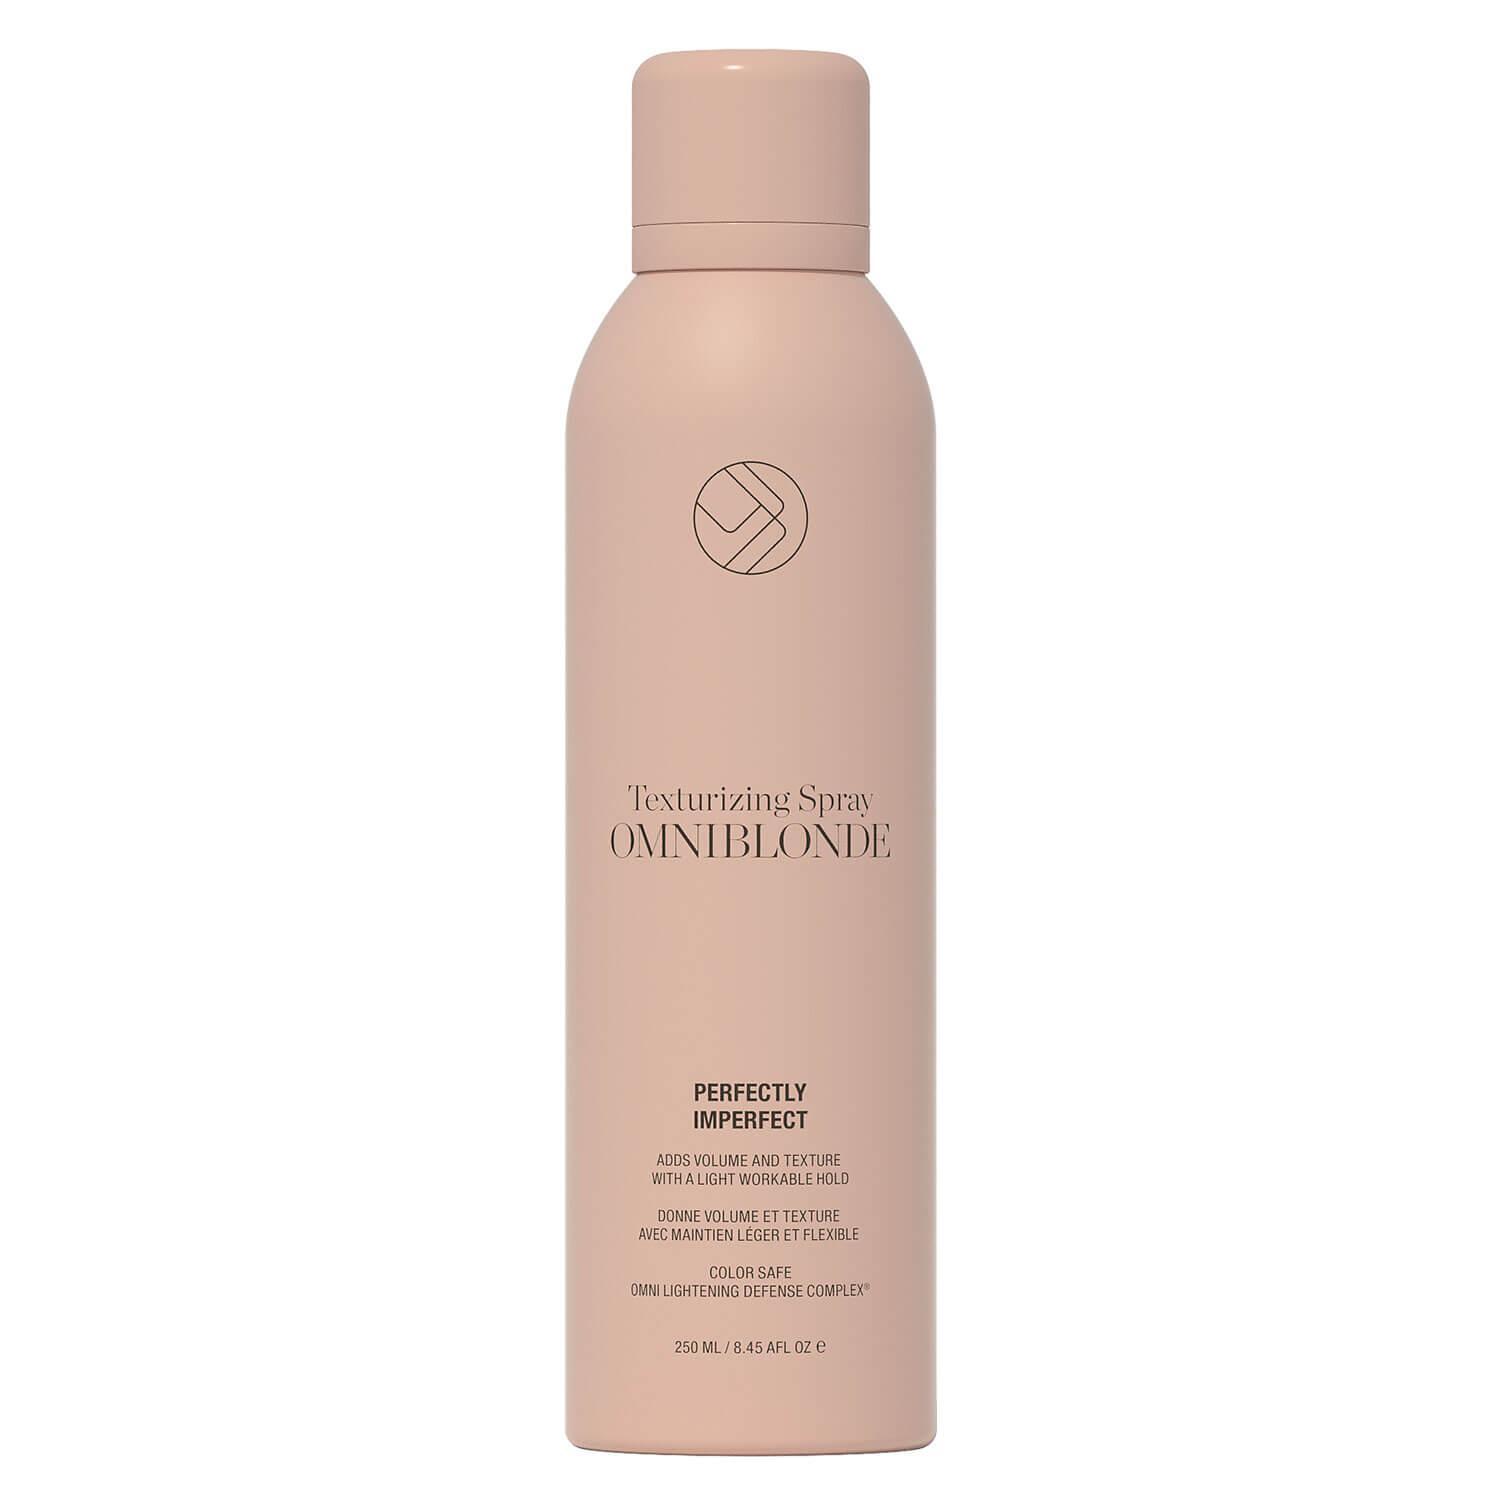 Omniblonde - Perfectly Imperfect Texturing Spray